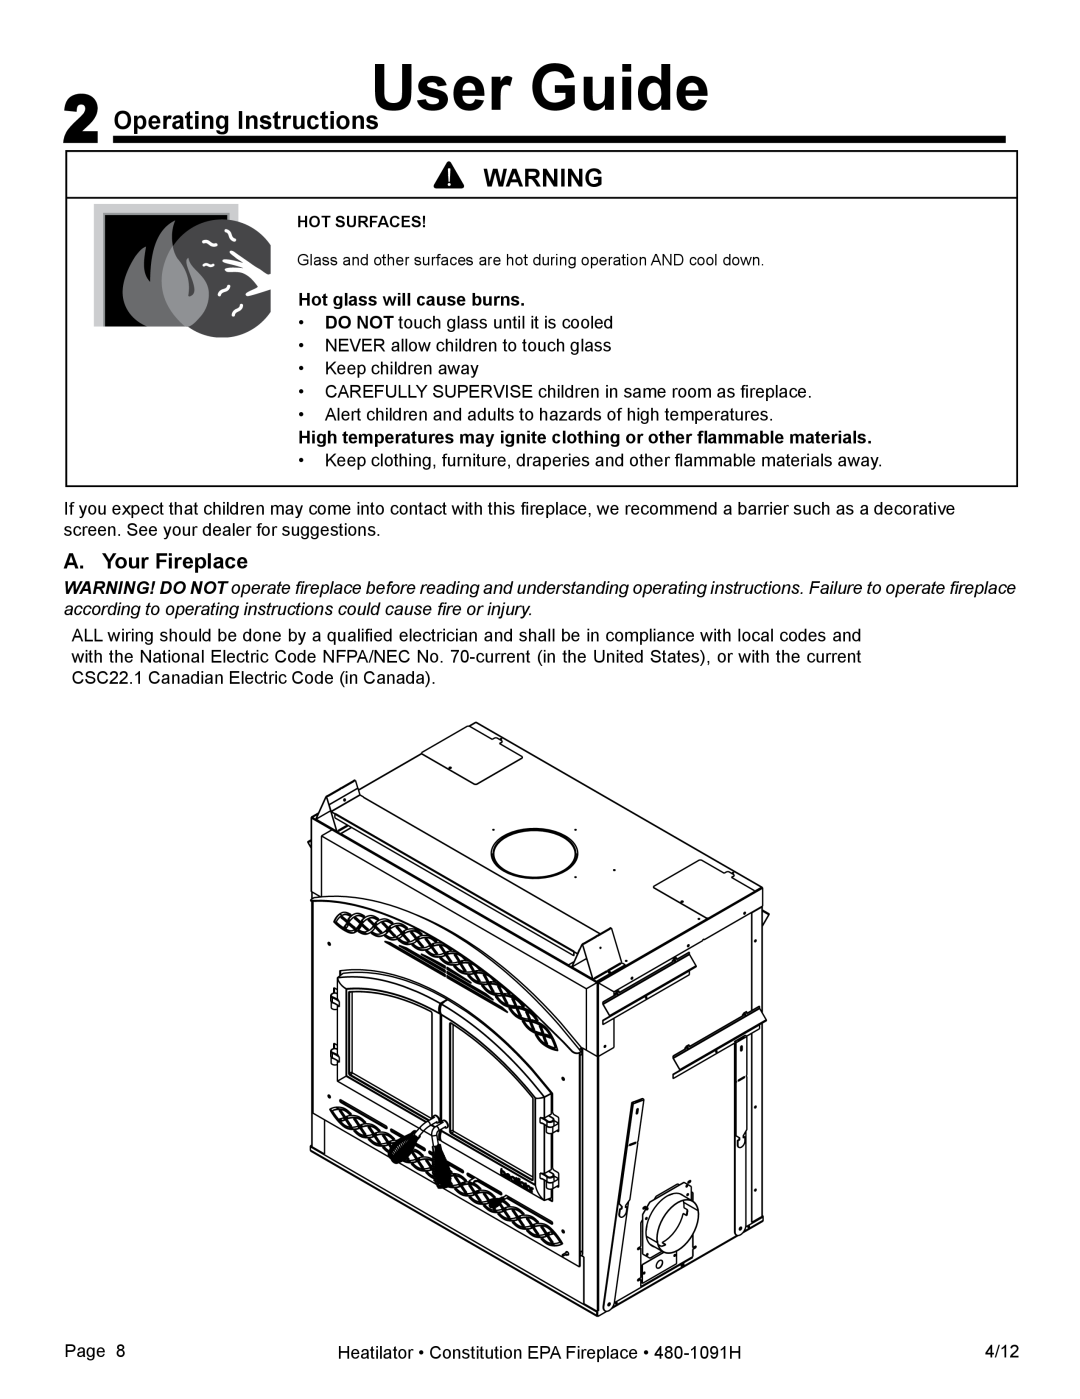 Heatiator C40 owner manual Operating InstructionsUser Guide, A. Your Fireplace, Hot glass will cause burns 